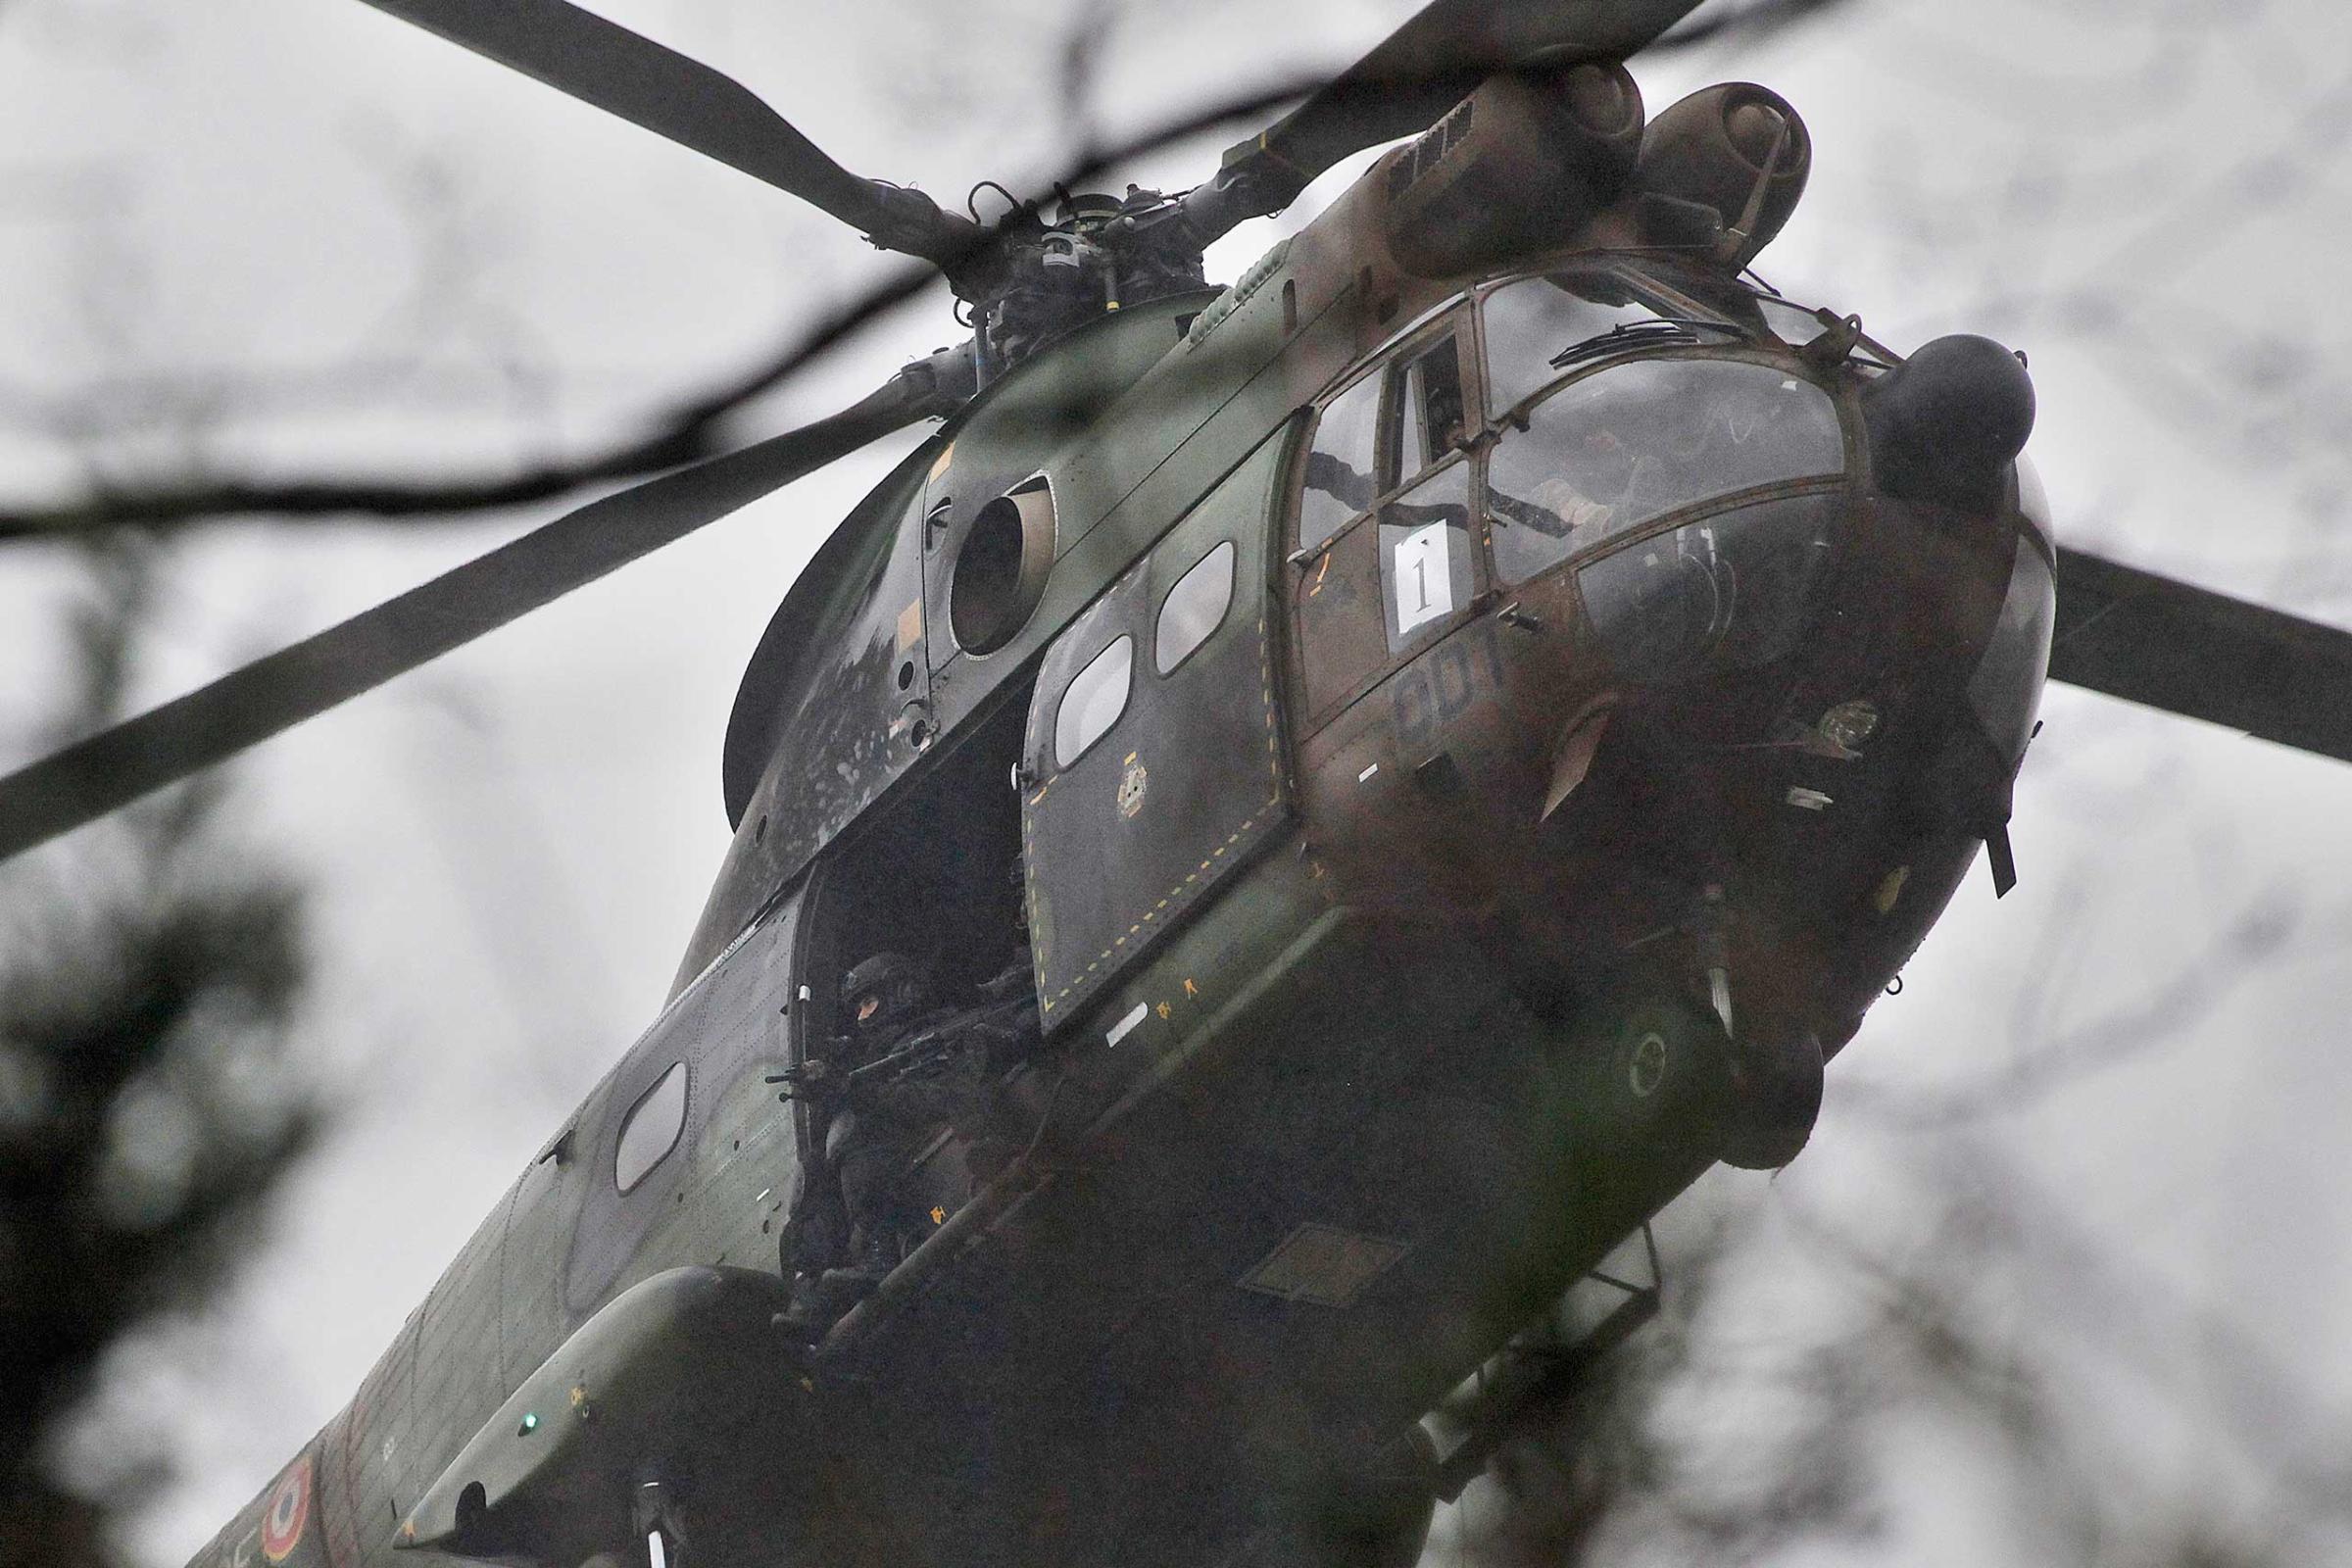 Armed security forces fly overhead in a military helicopter in Dammartin-en-Goele, northeast of Paris, Jan. 9, 2015.